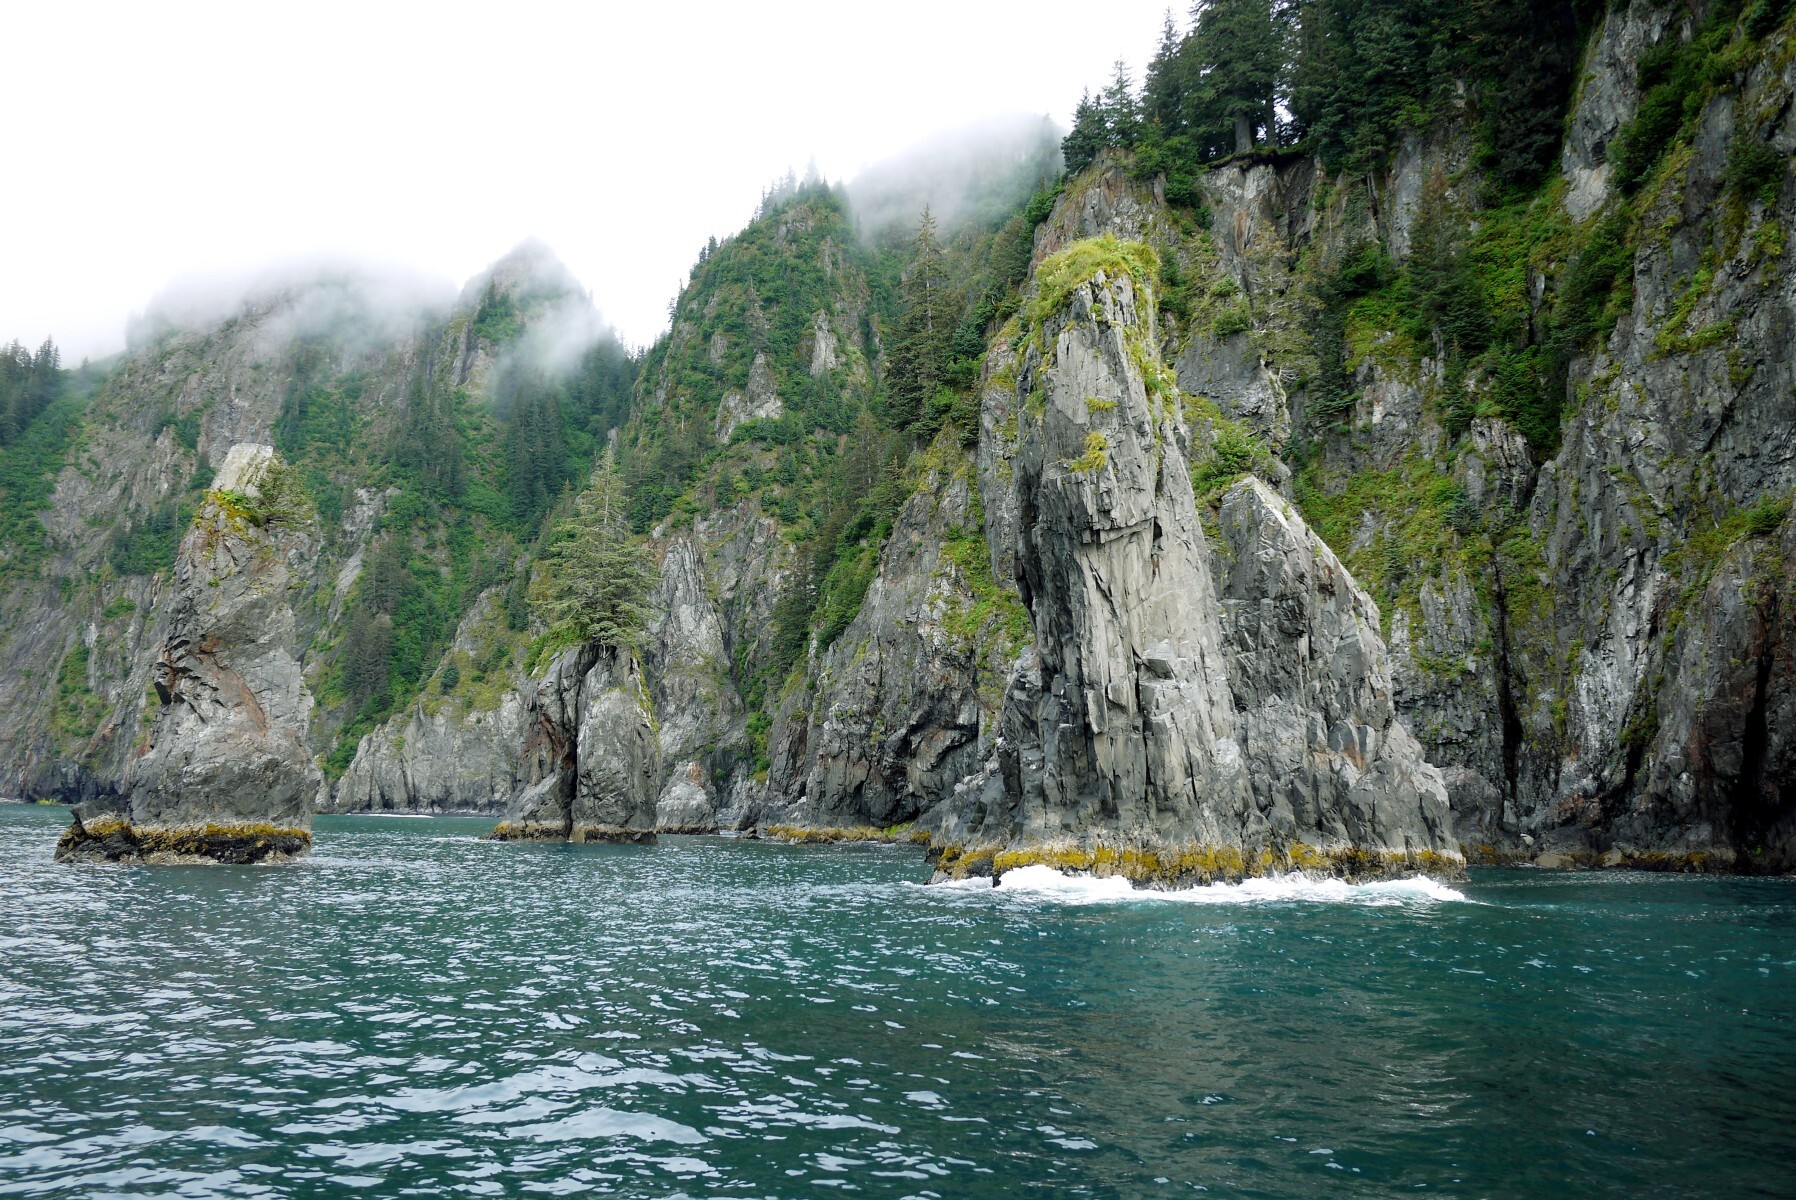 <p>Perhaps the wildest state in the entire country, Alaska is home to plenty of remote and untouched lands. <a href="https://www.fws.gov/refuge/alaska_maritime/" rel="noreferrer noopener">Alaska Maritime National Wildlife Refuge</a> consists of 2,400 islands, headlands, rocks, islets, spires and reefs, with a total area of 4.9 million acres—more than half of which is wilderness.</p>